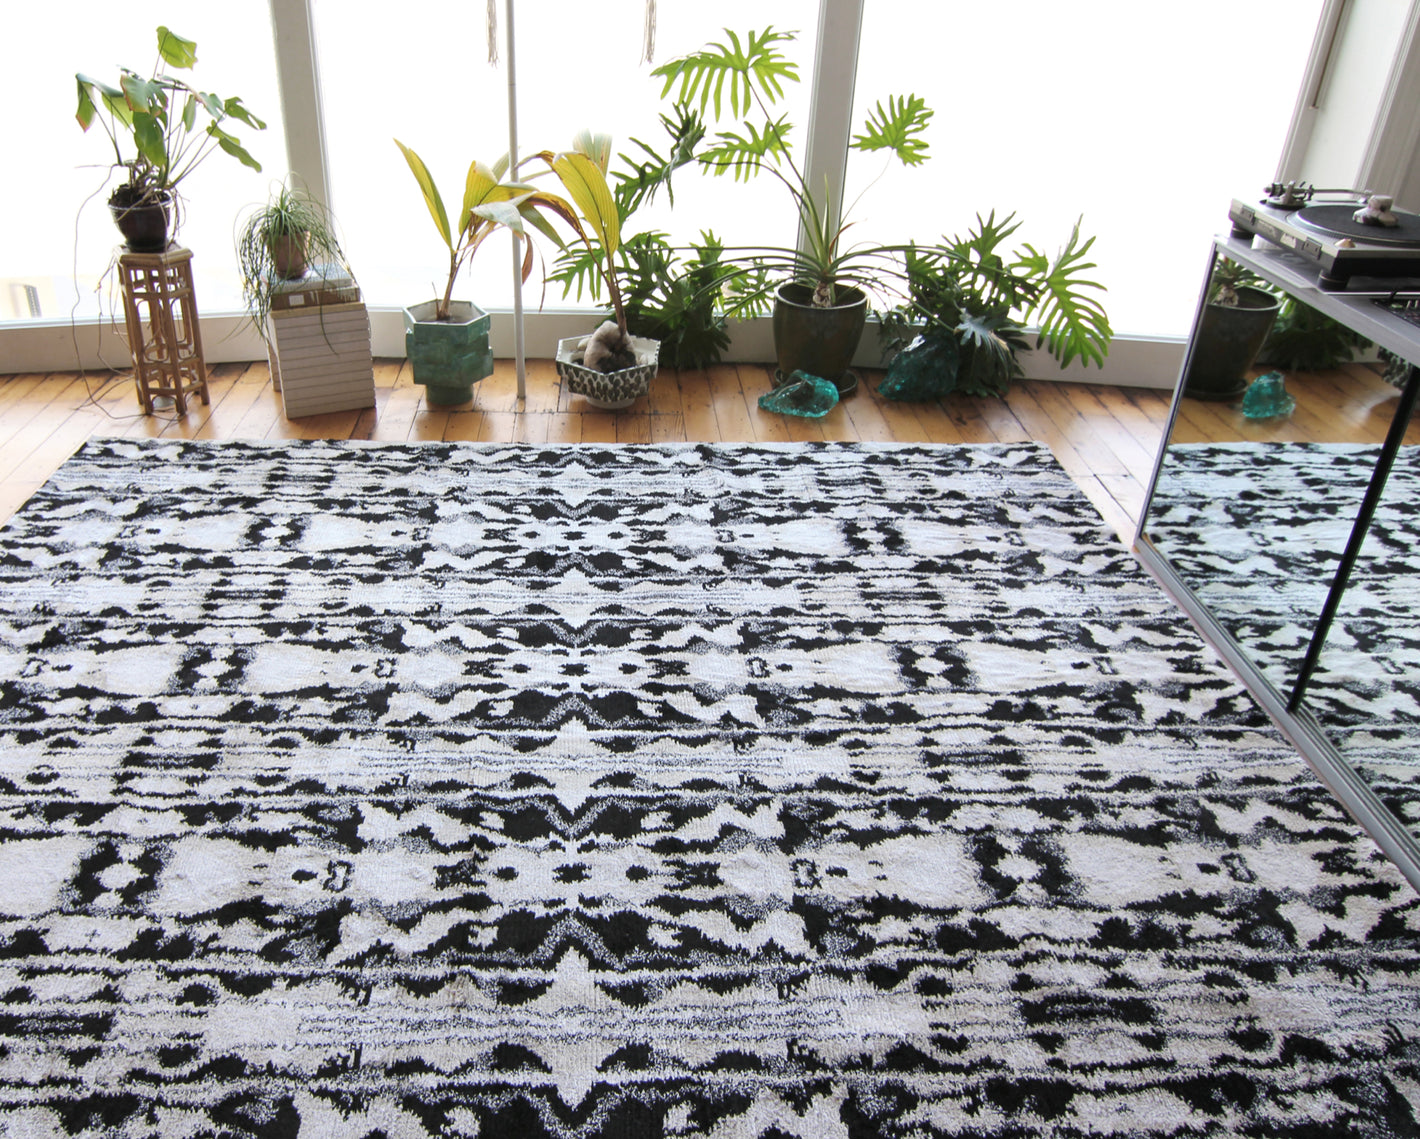 A black and white rug in a room